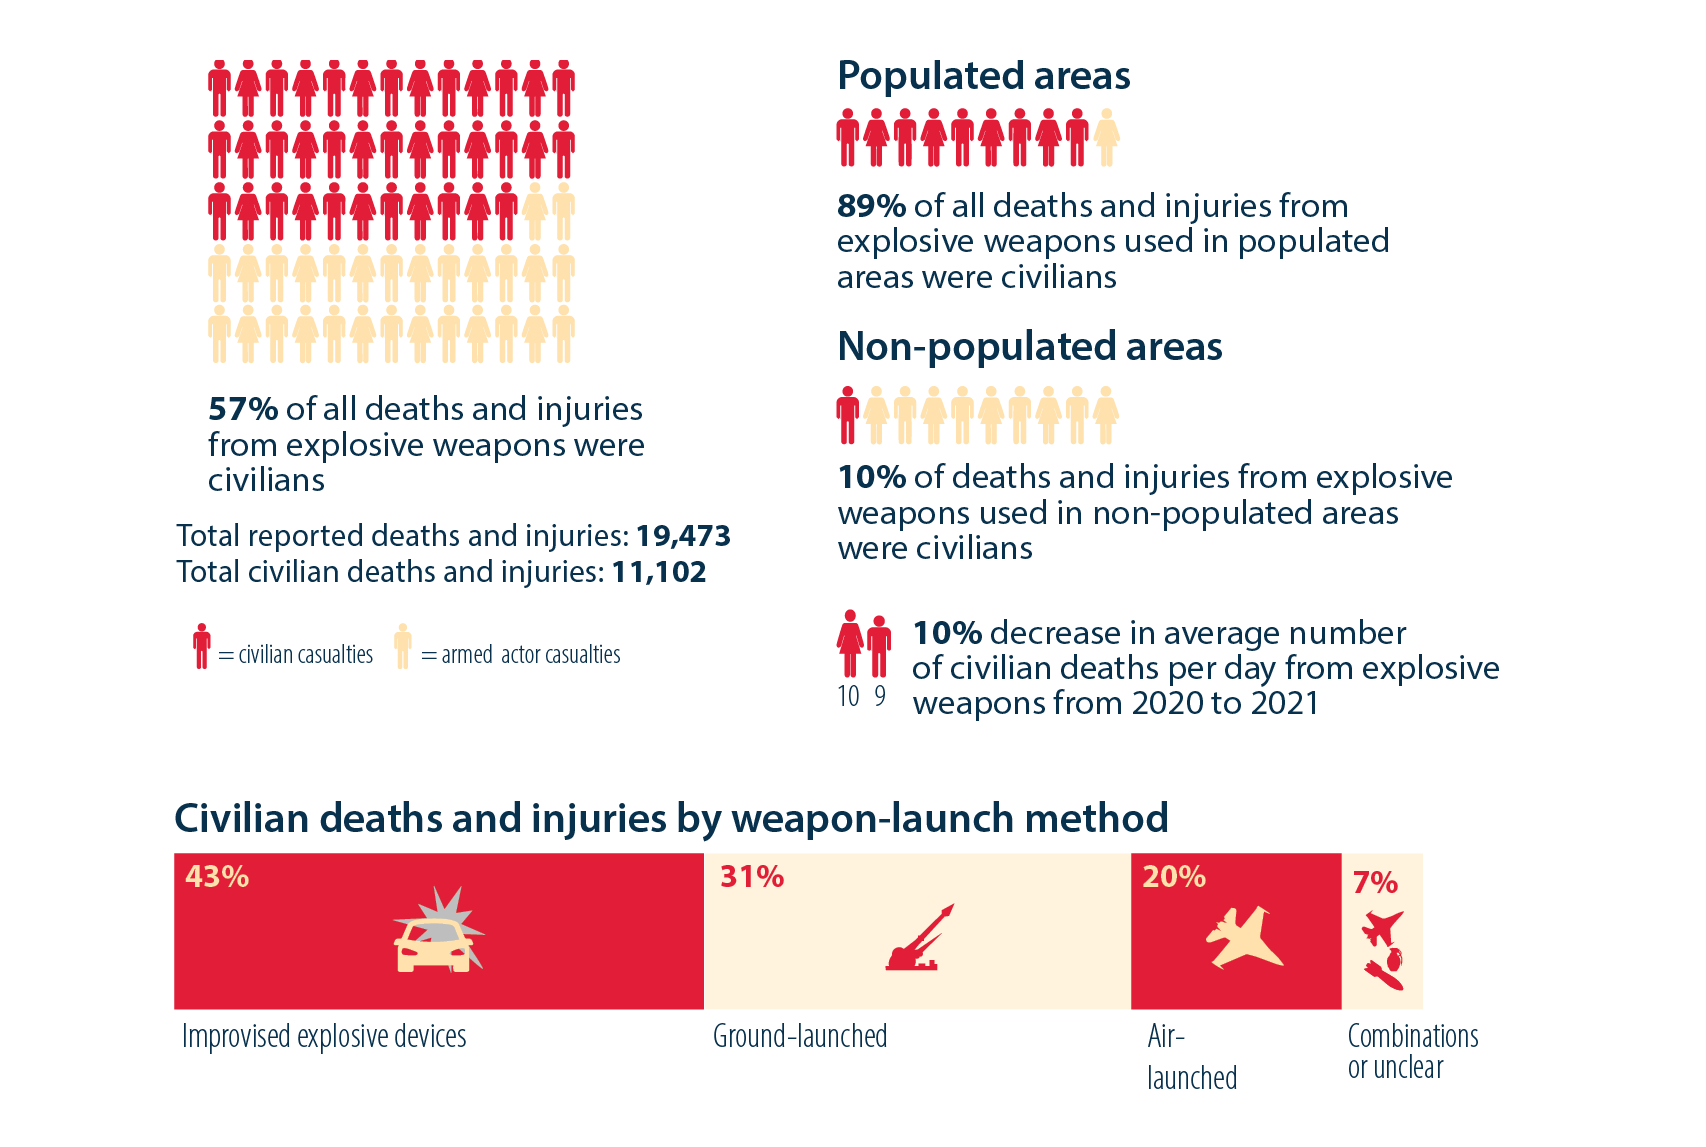 Infographic showing statistics oncivilian deaths from explosive weapons in populated areas